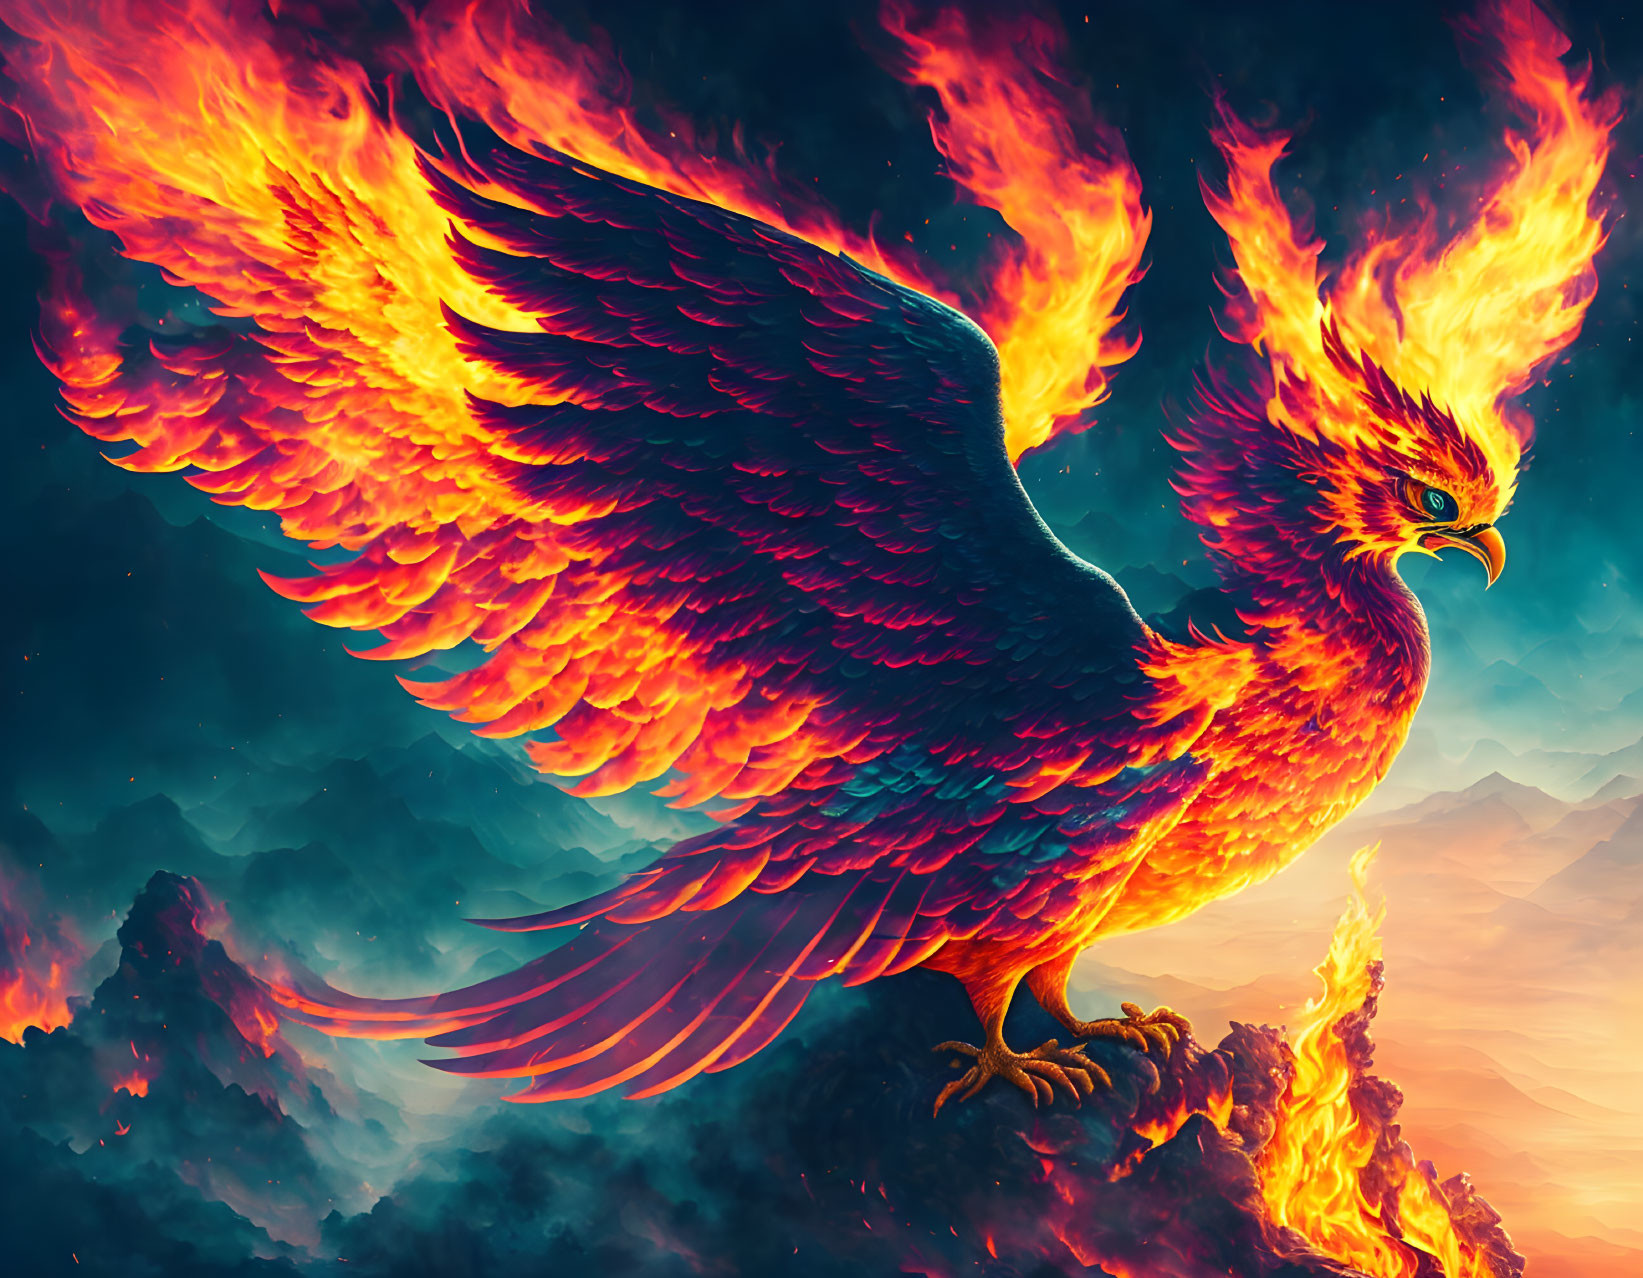 Phoenix rising from the fire